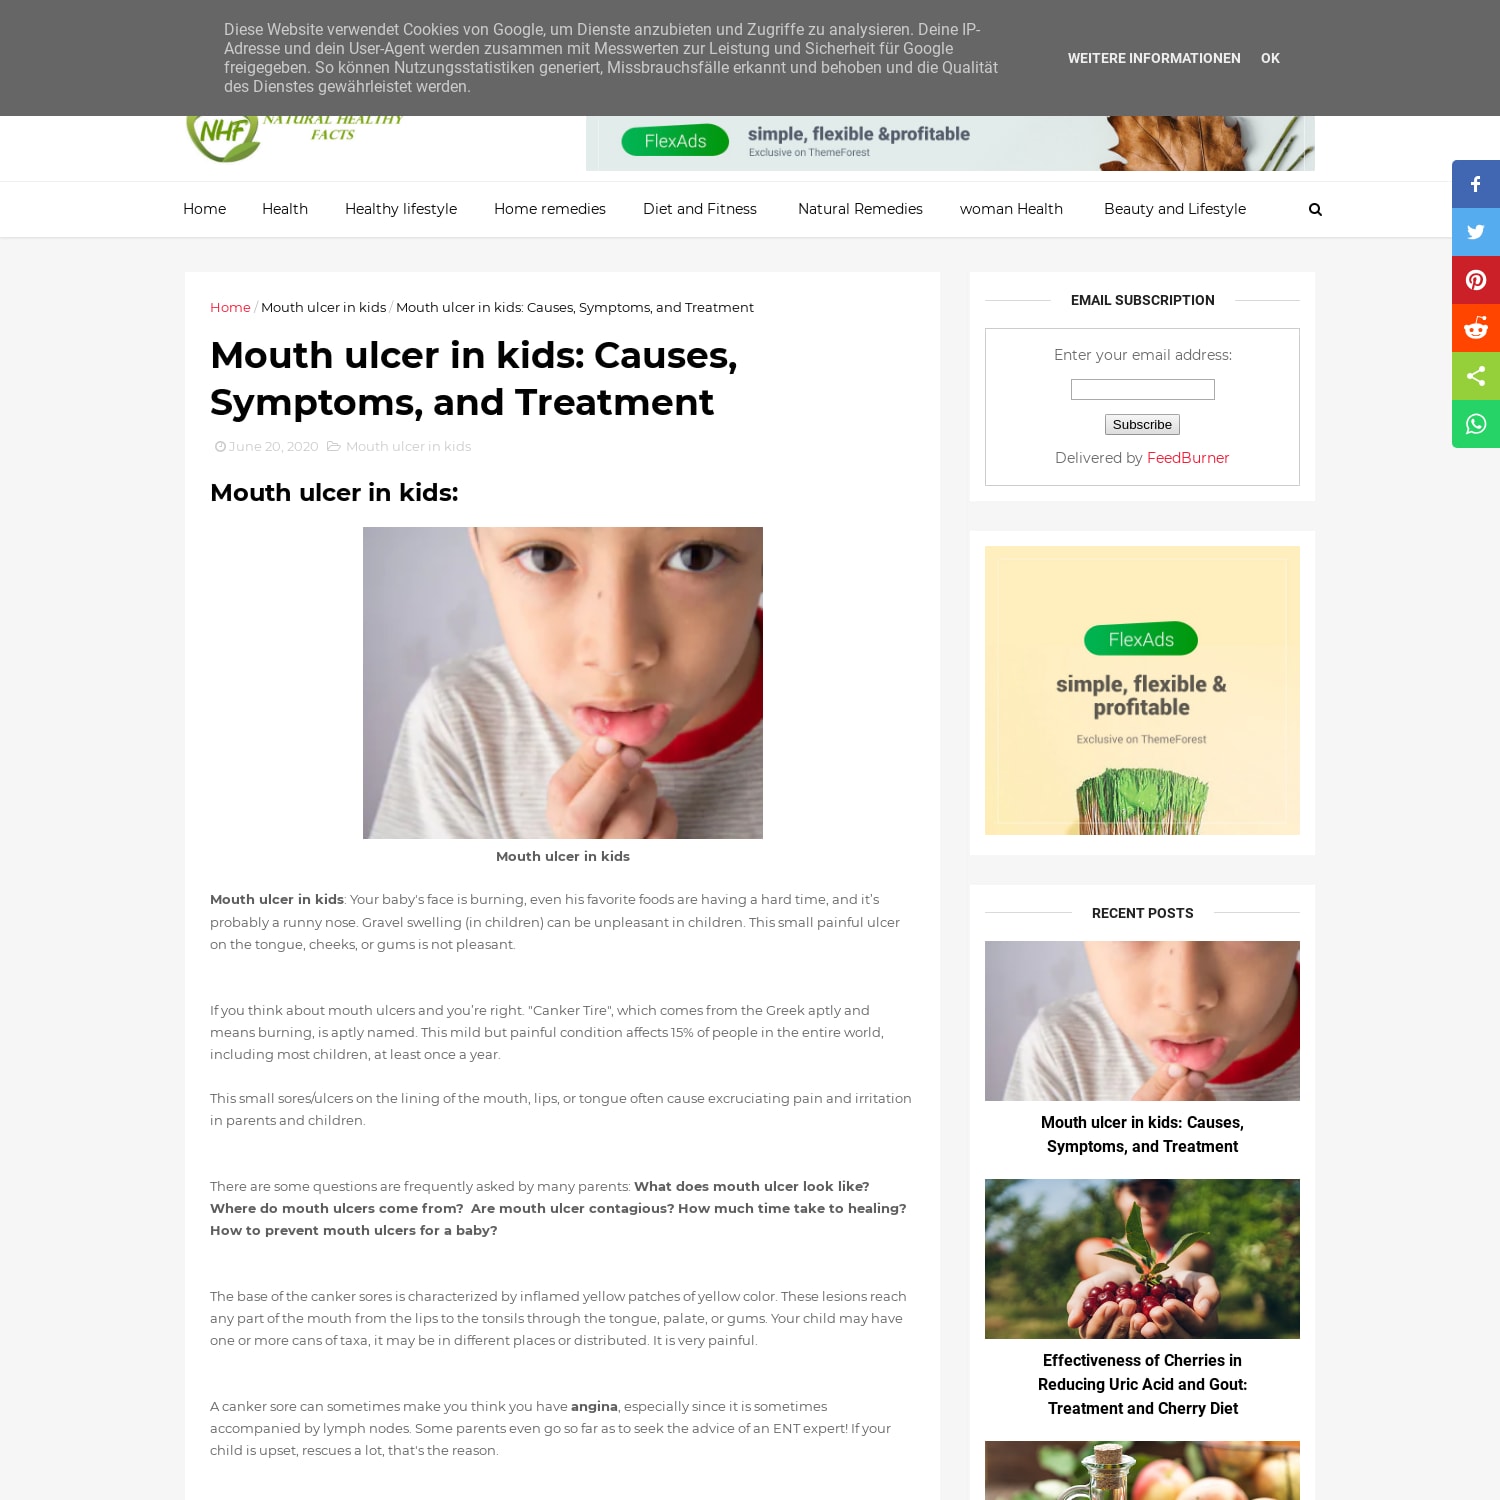 Mouth ulcer in kids: Causes, Symptoms, and Treatment